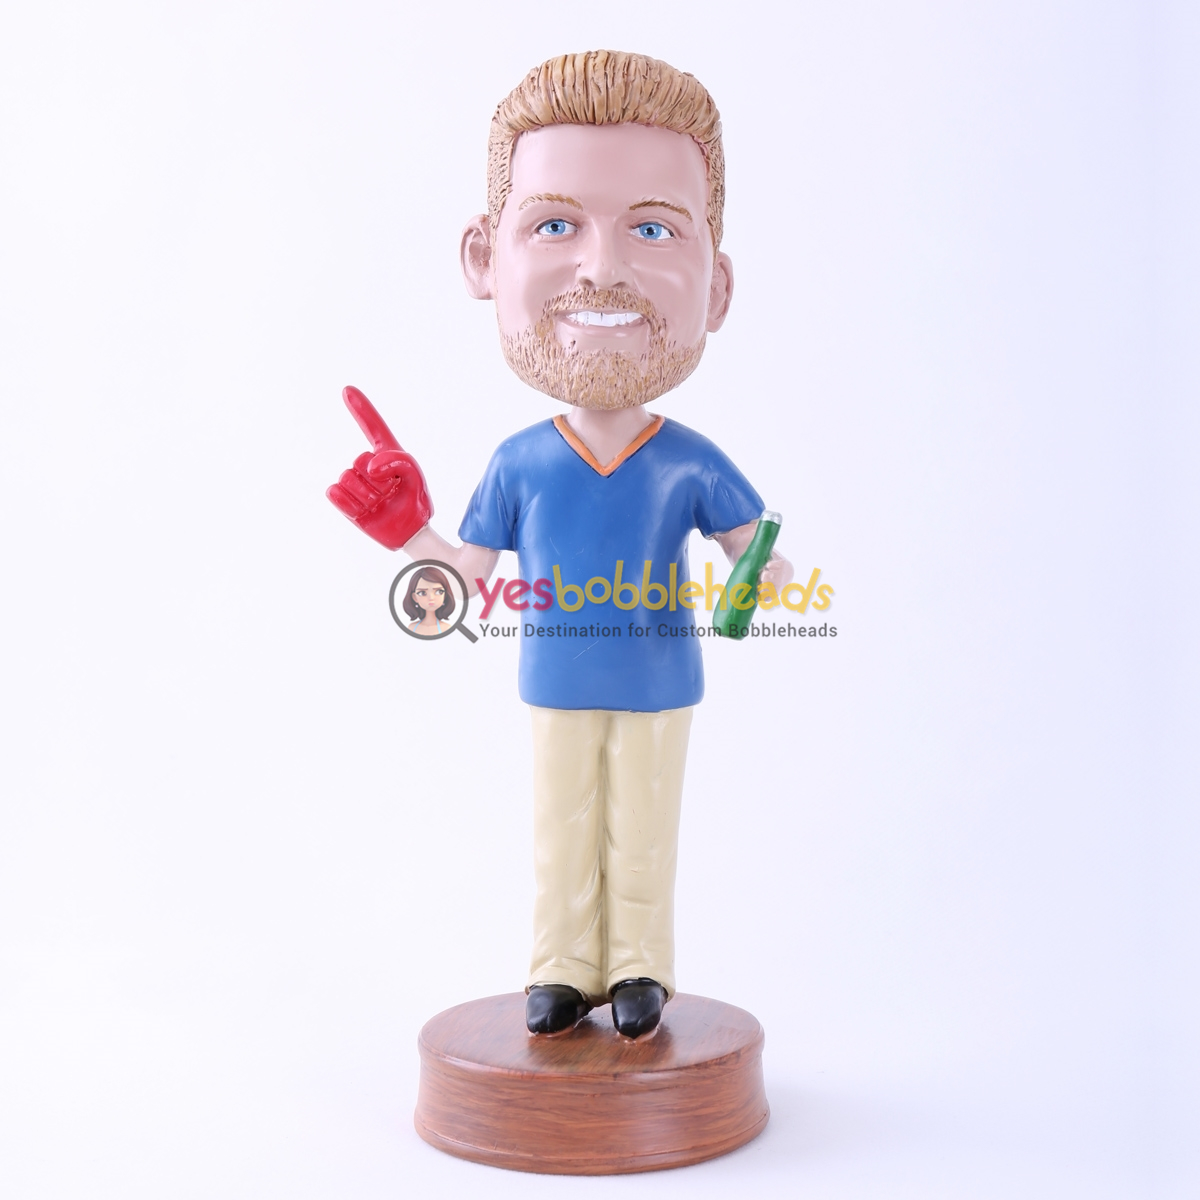 Picture of Custom Bobblehead Doll: Man to Drink